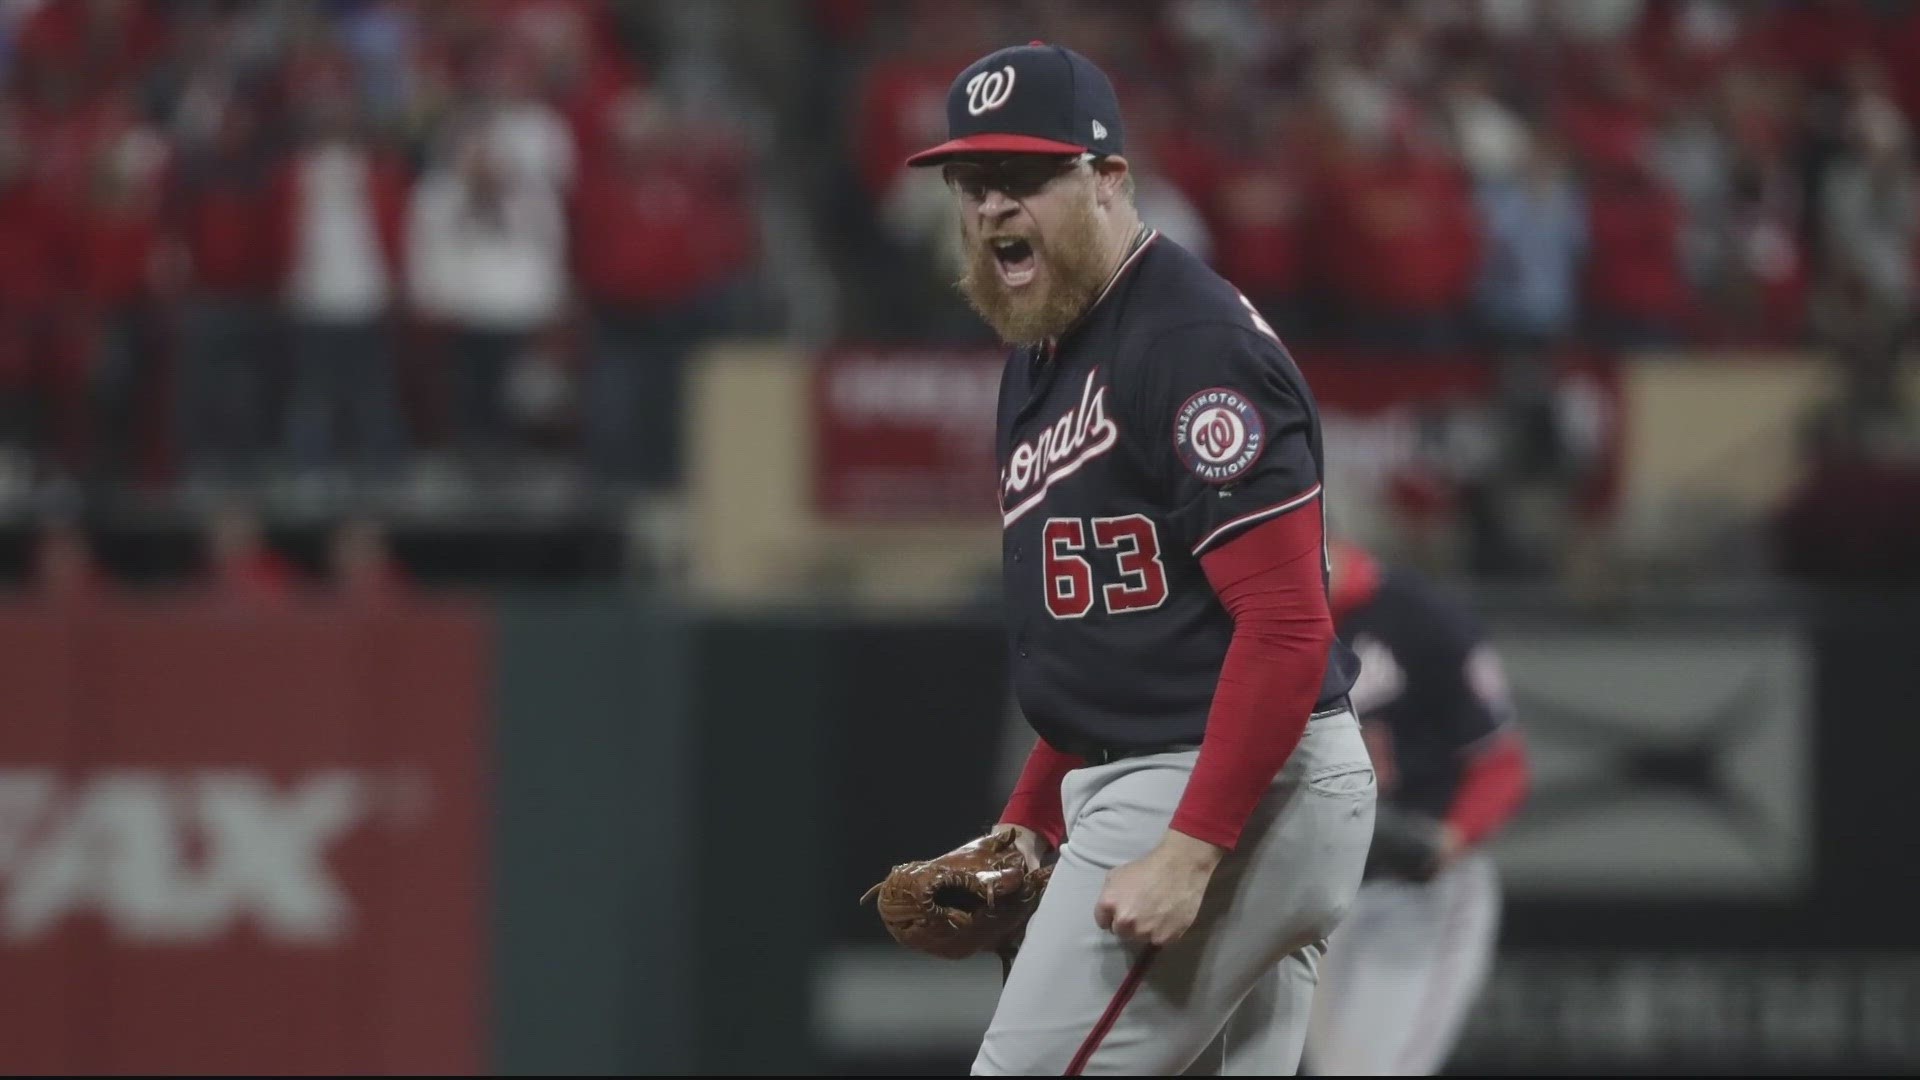 The Nats pitcher announced he will be hanging up his glove after 11 seasons.